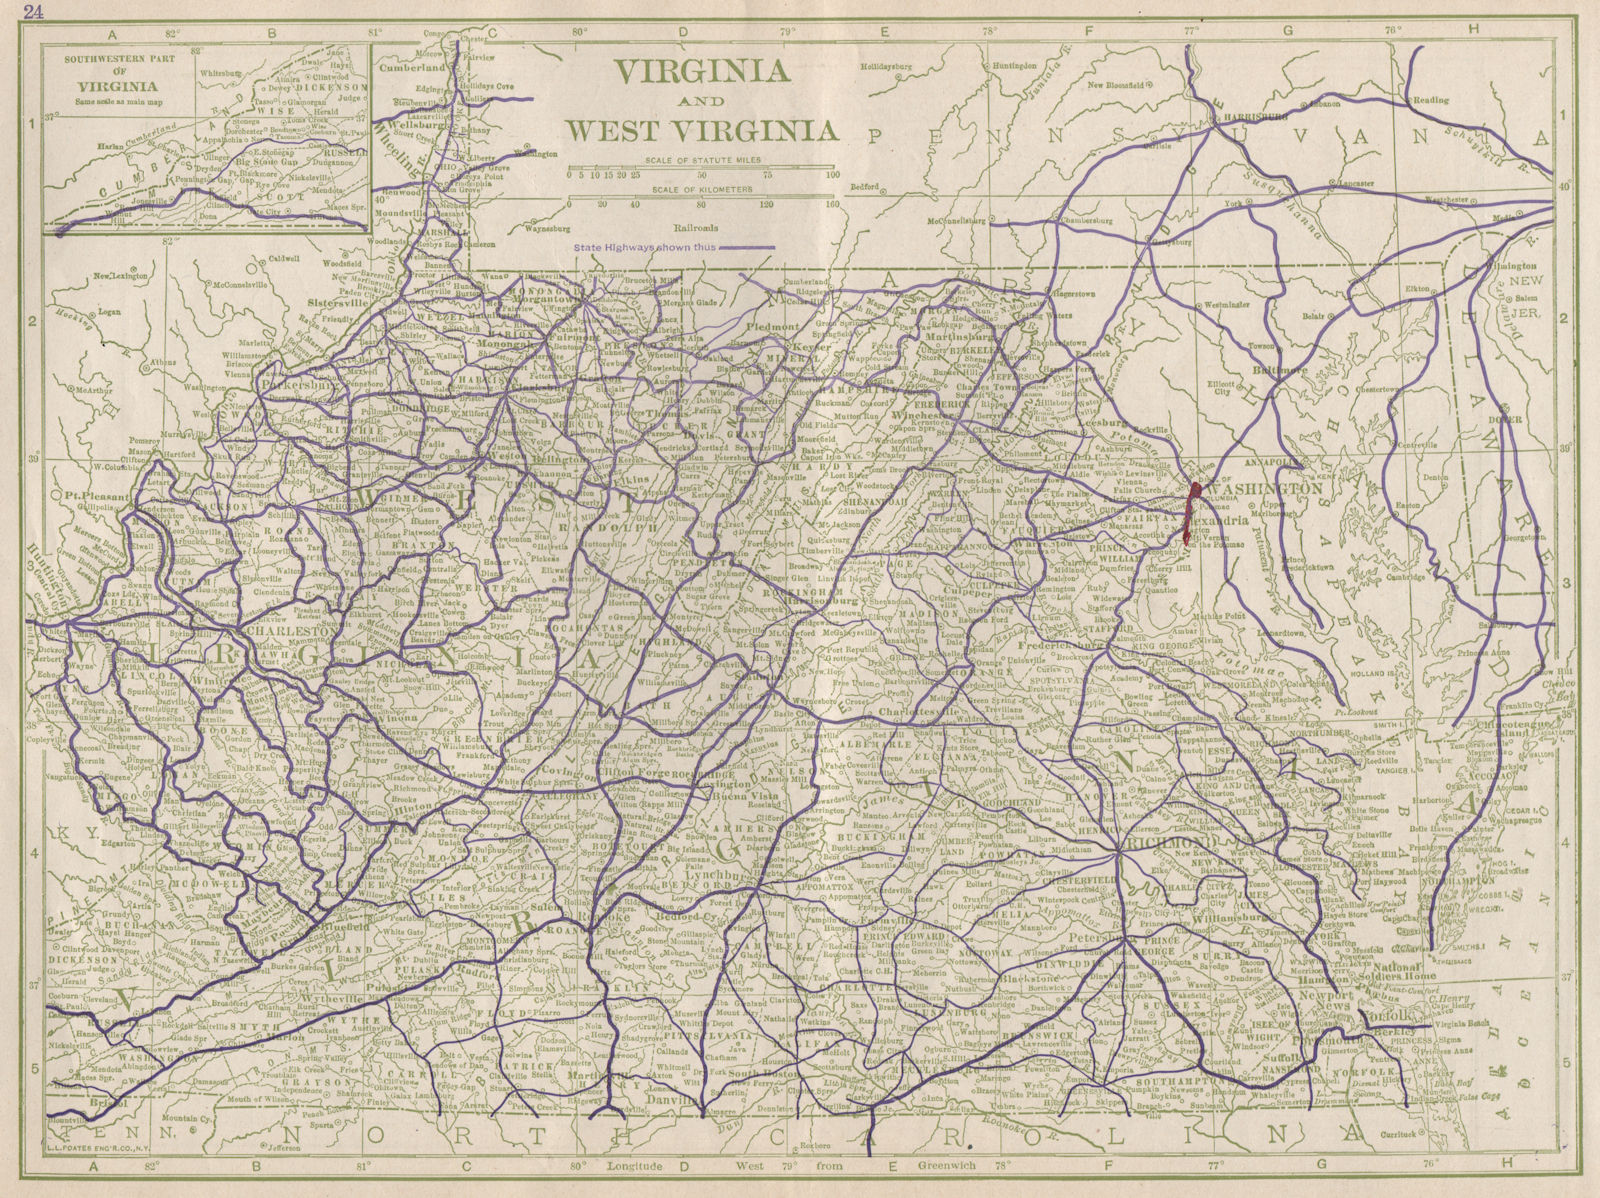 Virginia and West Virginia State Highways. POATES 1925 old vintage map chart